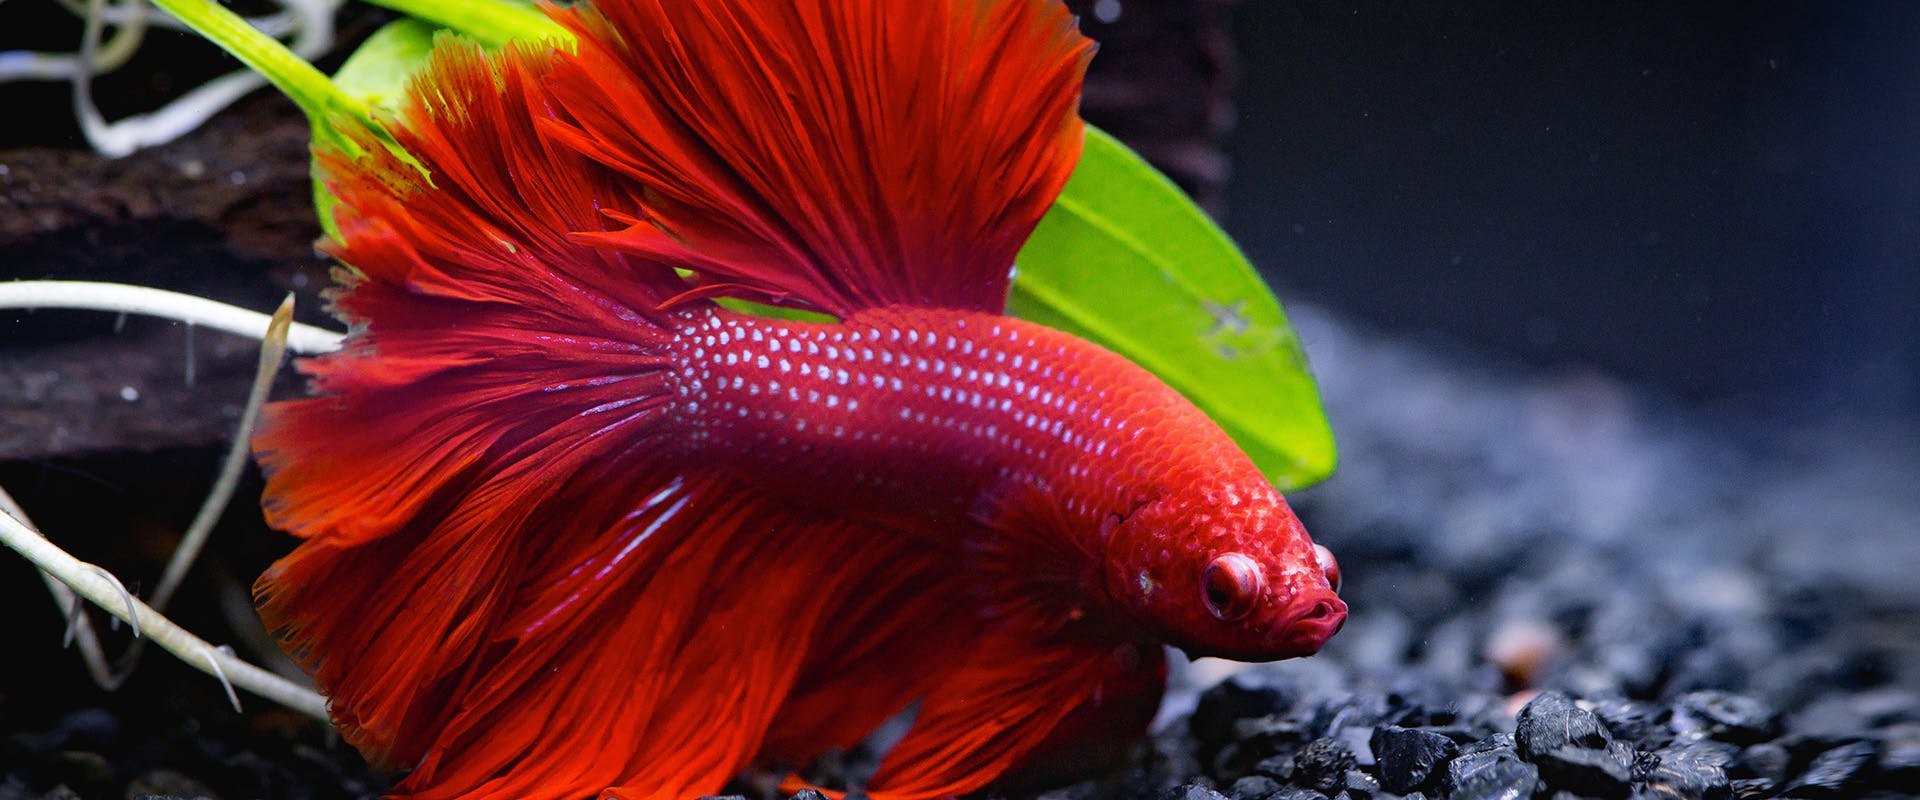 A red betta fish swimming in a tank